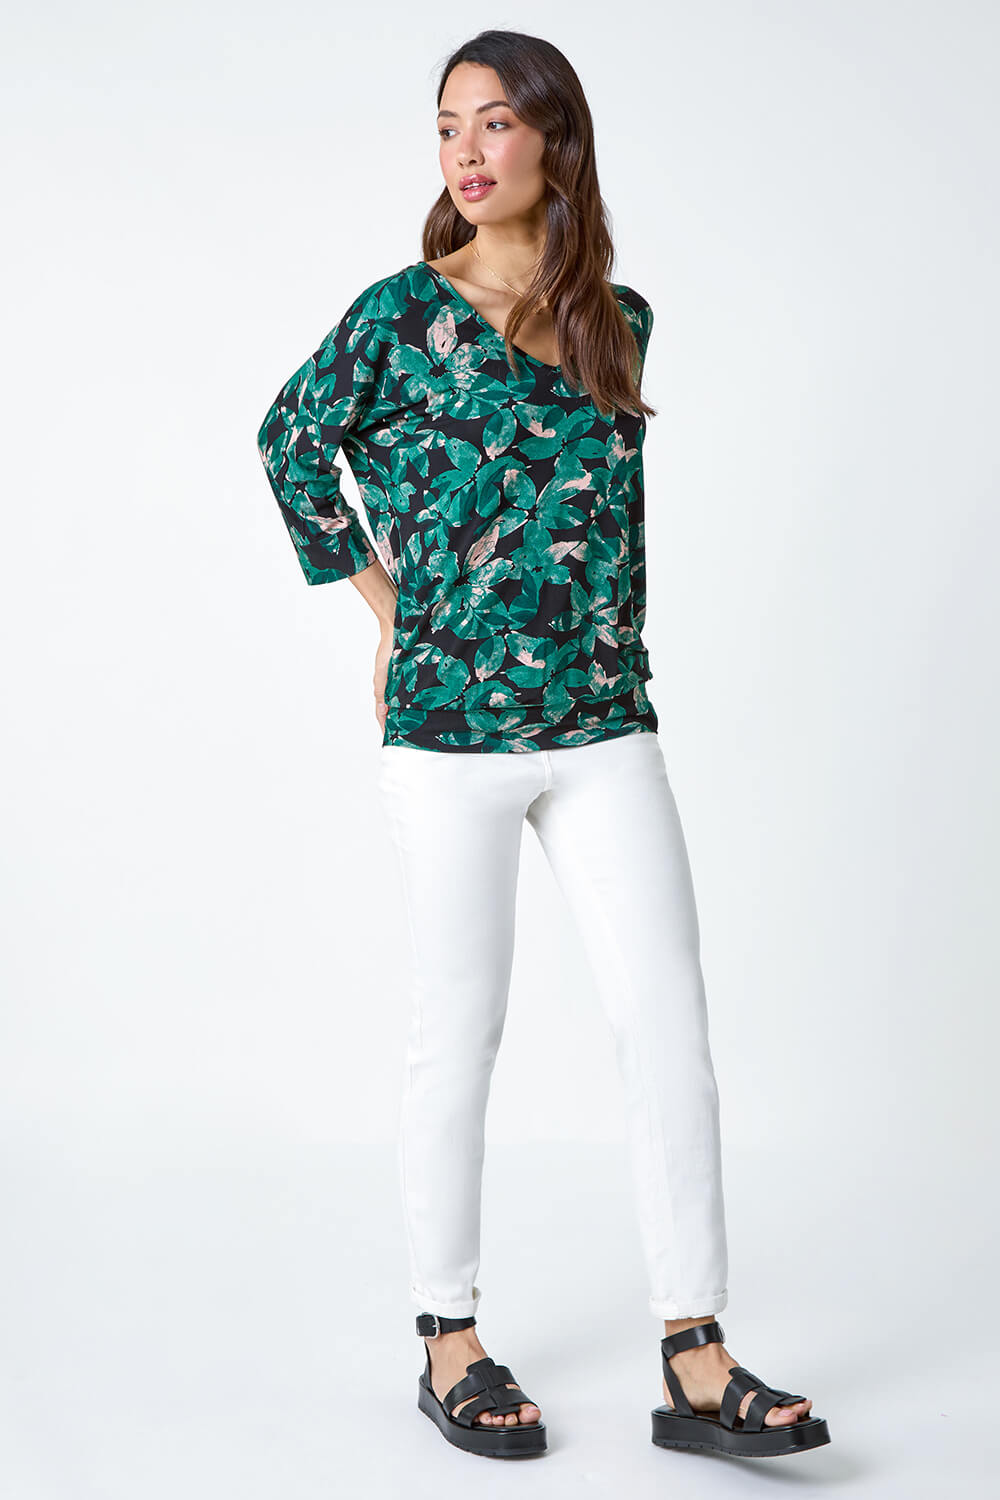 Green Floral Print Blouson Stretch Top, Image 4 of 5